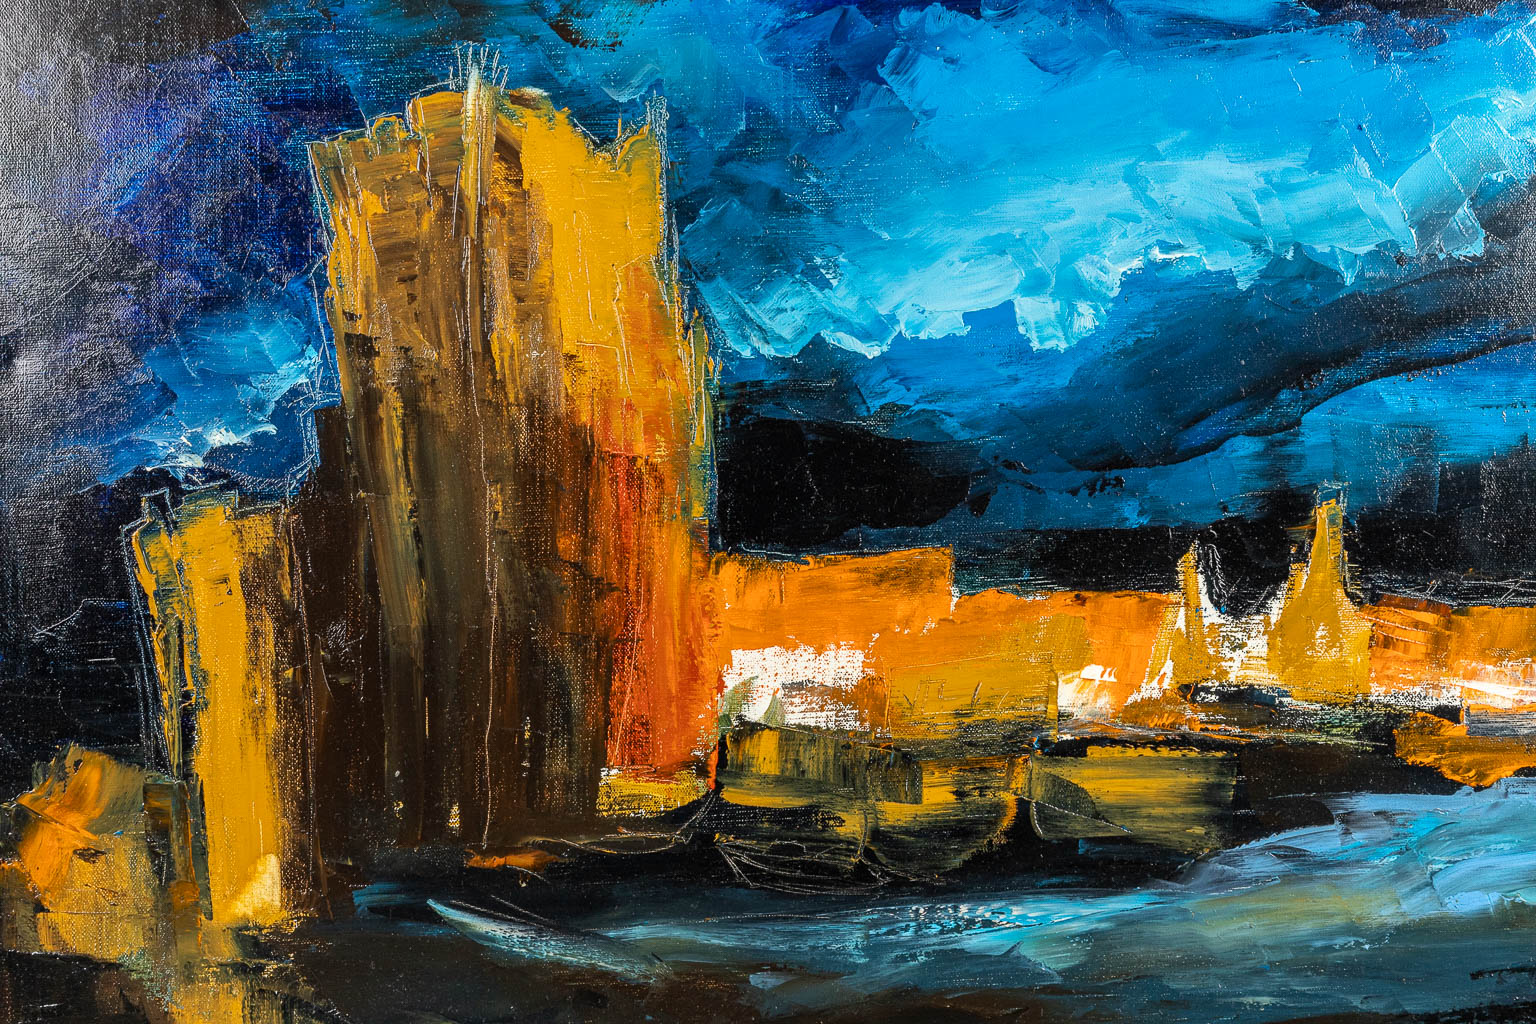 Walter VERBRAECKE (XX) Abstract Village View 'Lisseweghe', dated 1986. (100 x 80 cm)